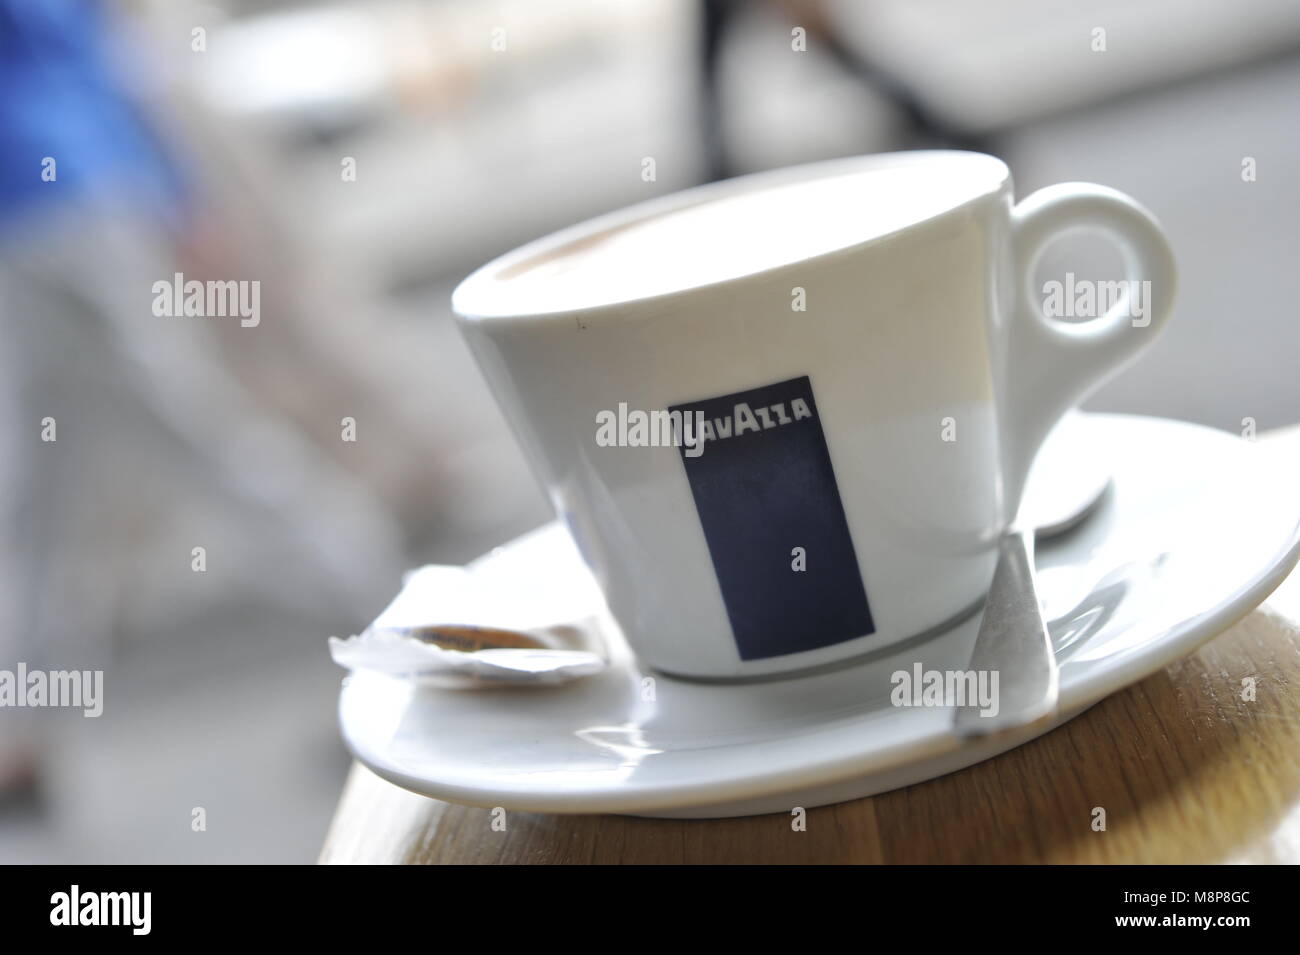 https://c8.alamy.com/comp/M8P8GC/cup-of-lavazza-latte-coffee-in-white-china-cup-with-white-saucer-in-M8P8GC.jpg